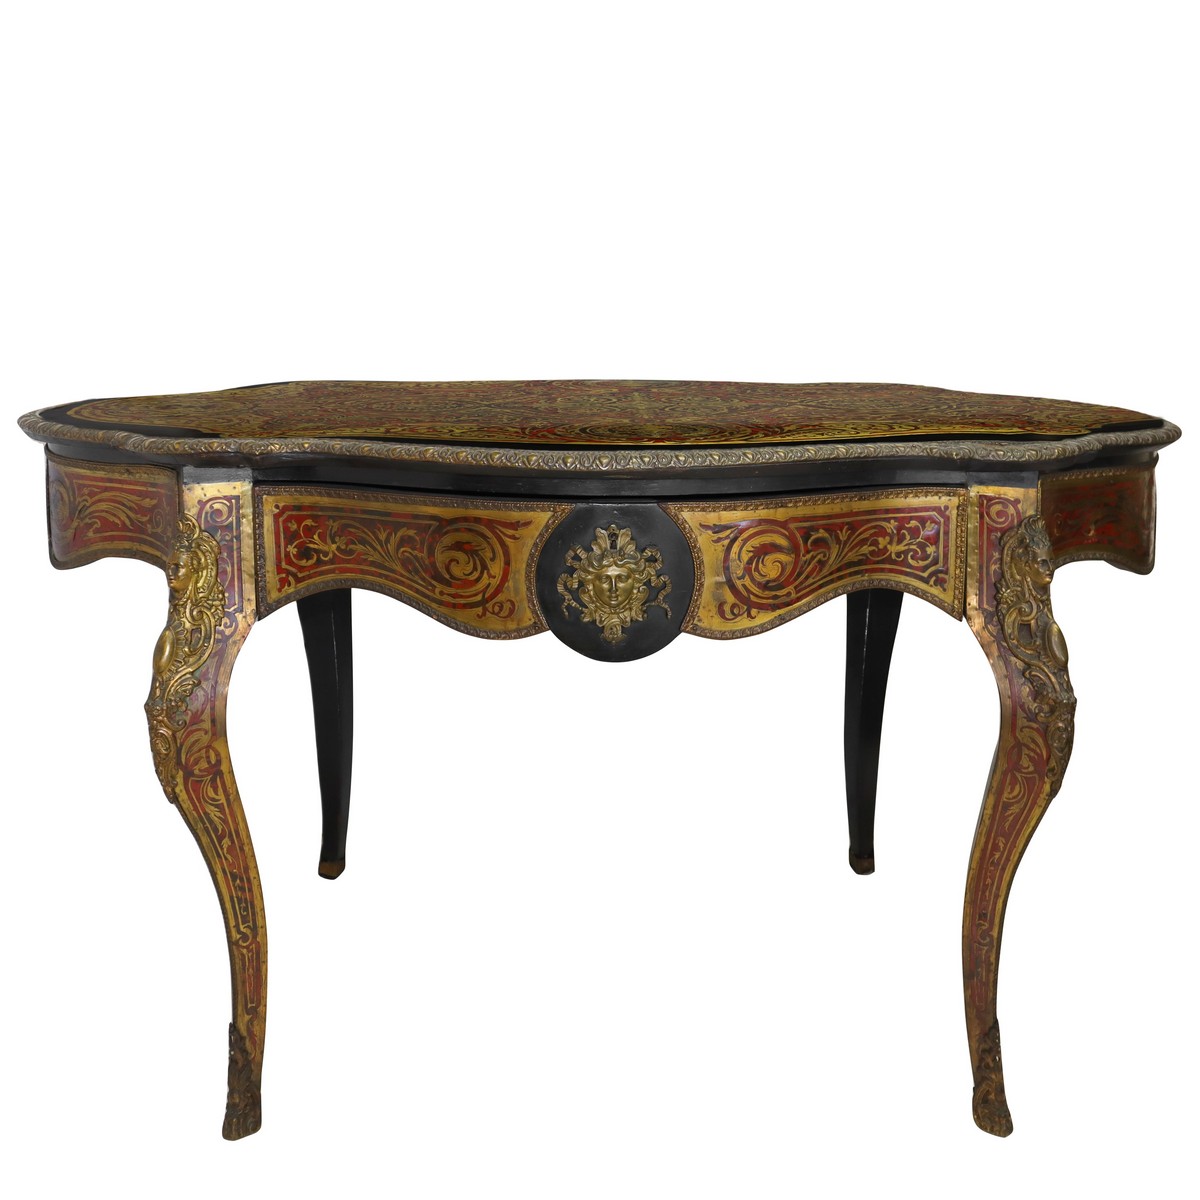 Boulle table, Late 19th century